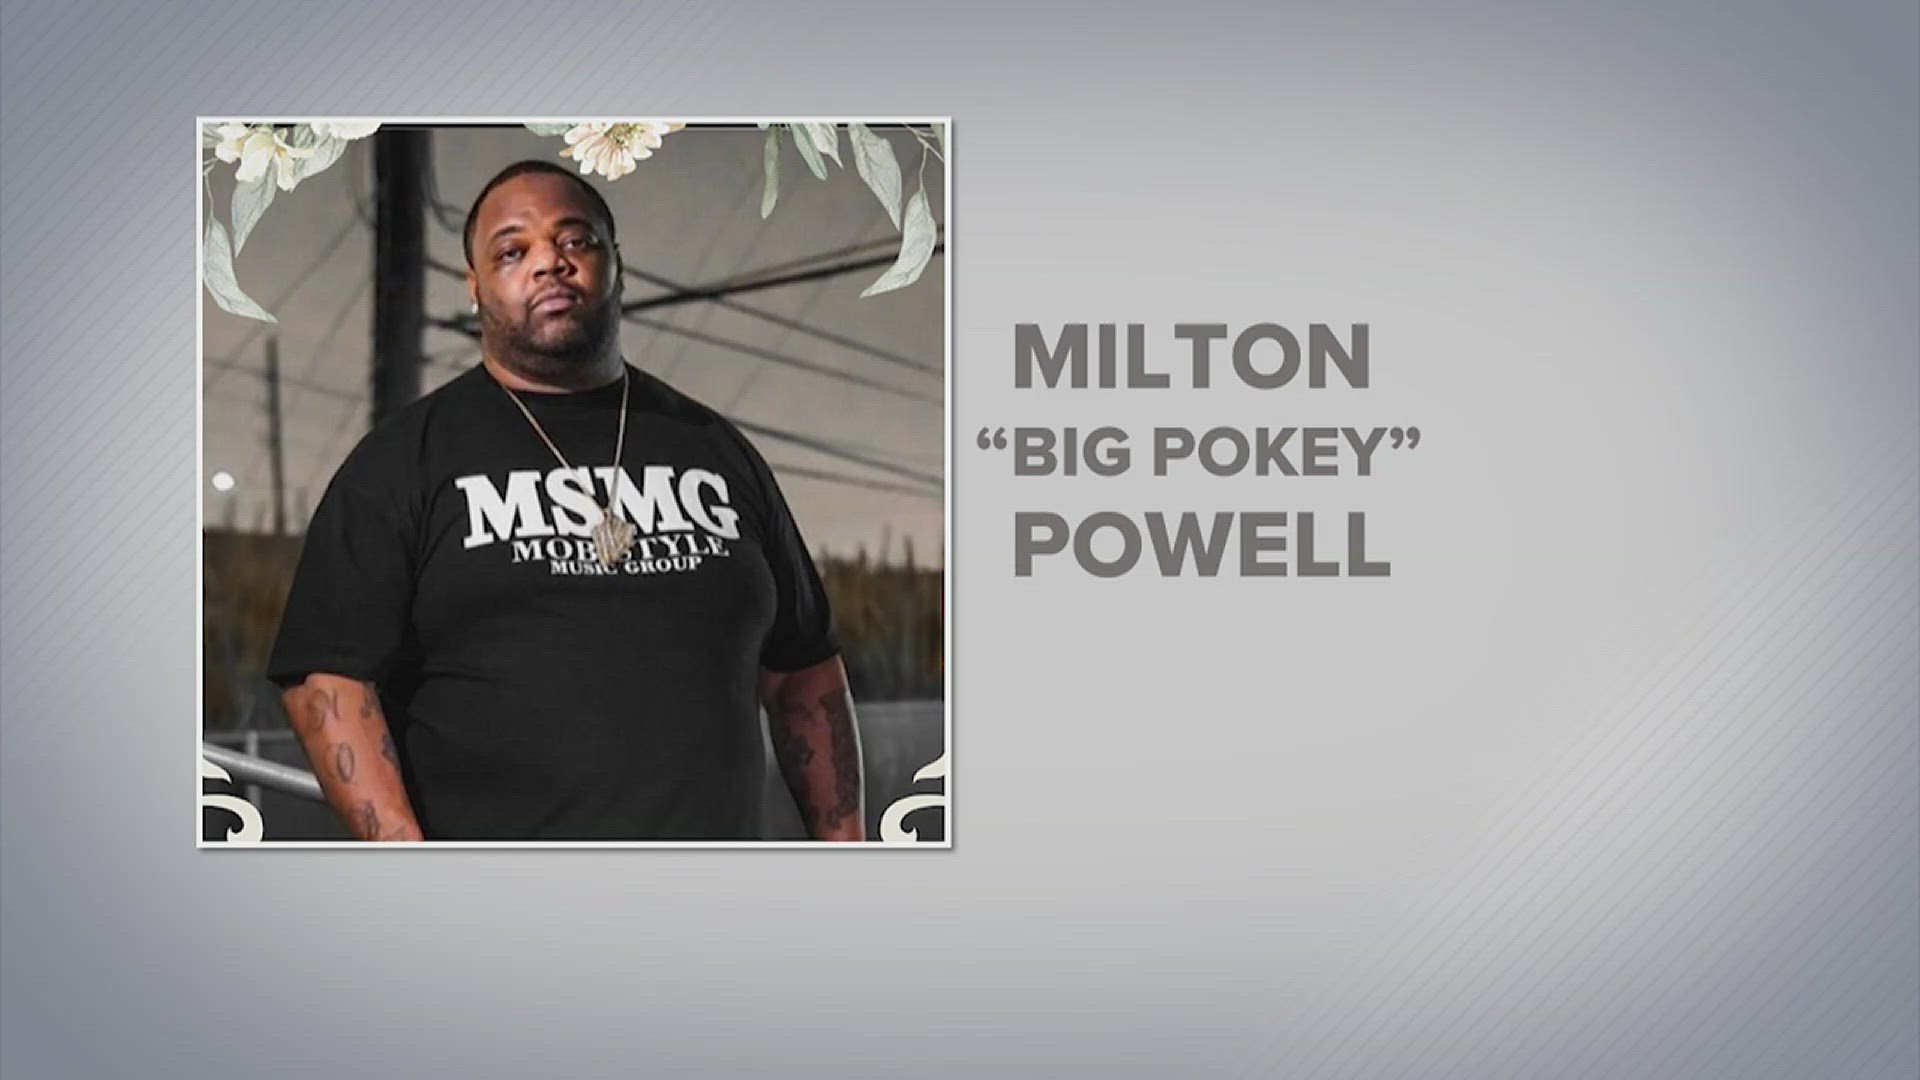 Judge Tom Gillam III tells 12News that preliminary autopsy results for Milton Powell, otherwise known as Big Pokey, didn't indicate a "pathological cause of death."